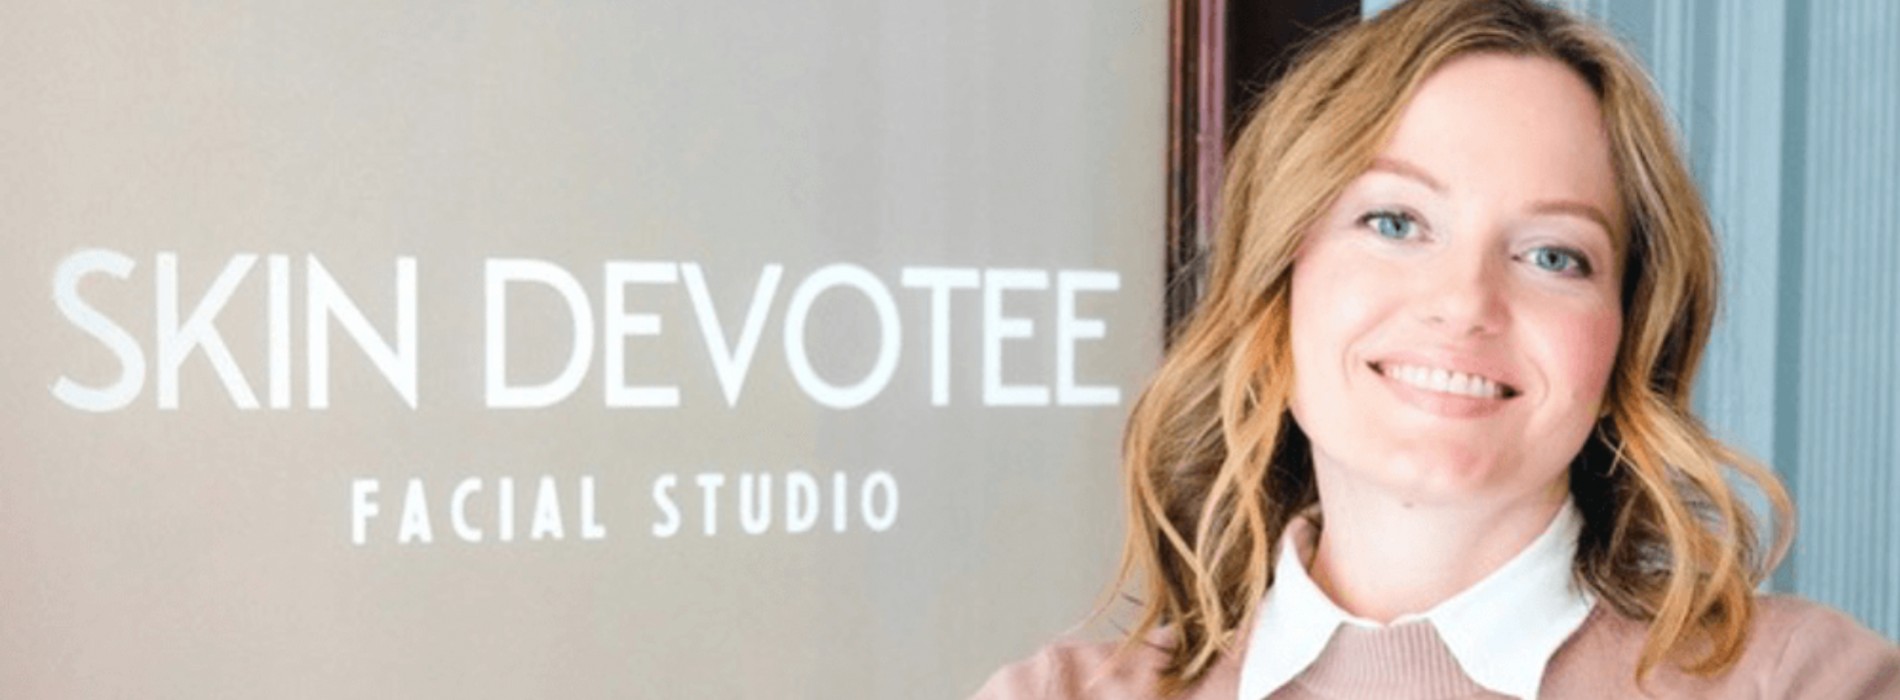 Interview with Joanna, Aesthetician and Founder of Skin Devotee Facial Studio